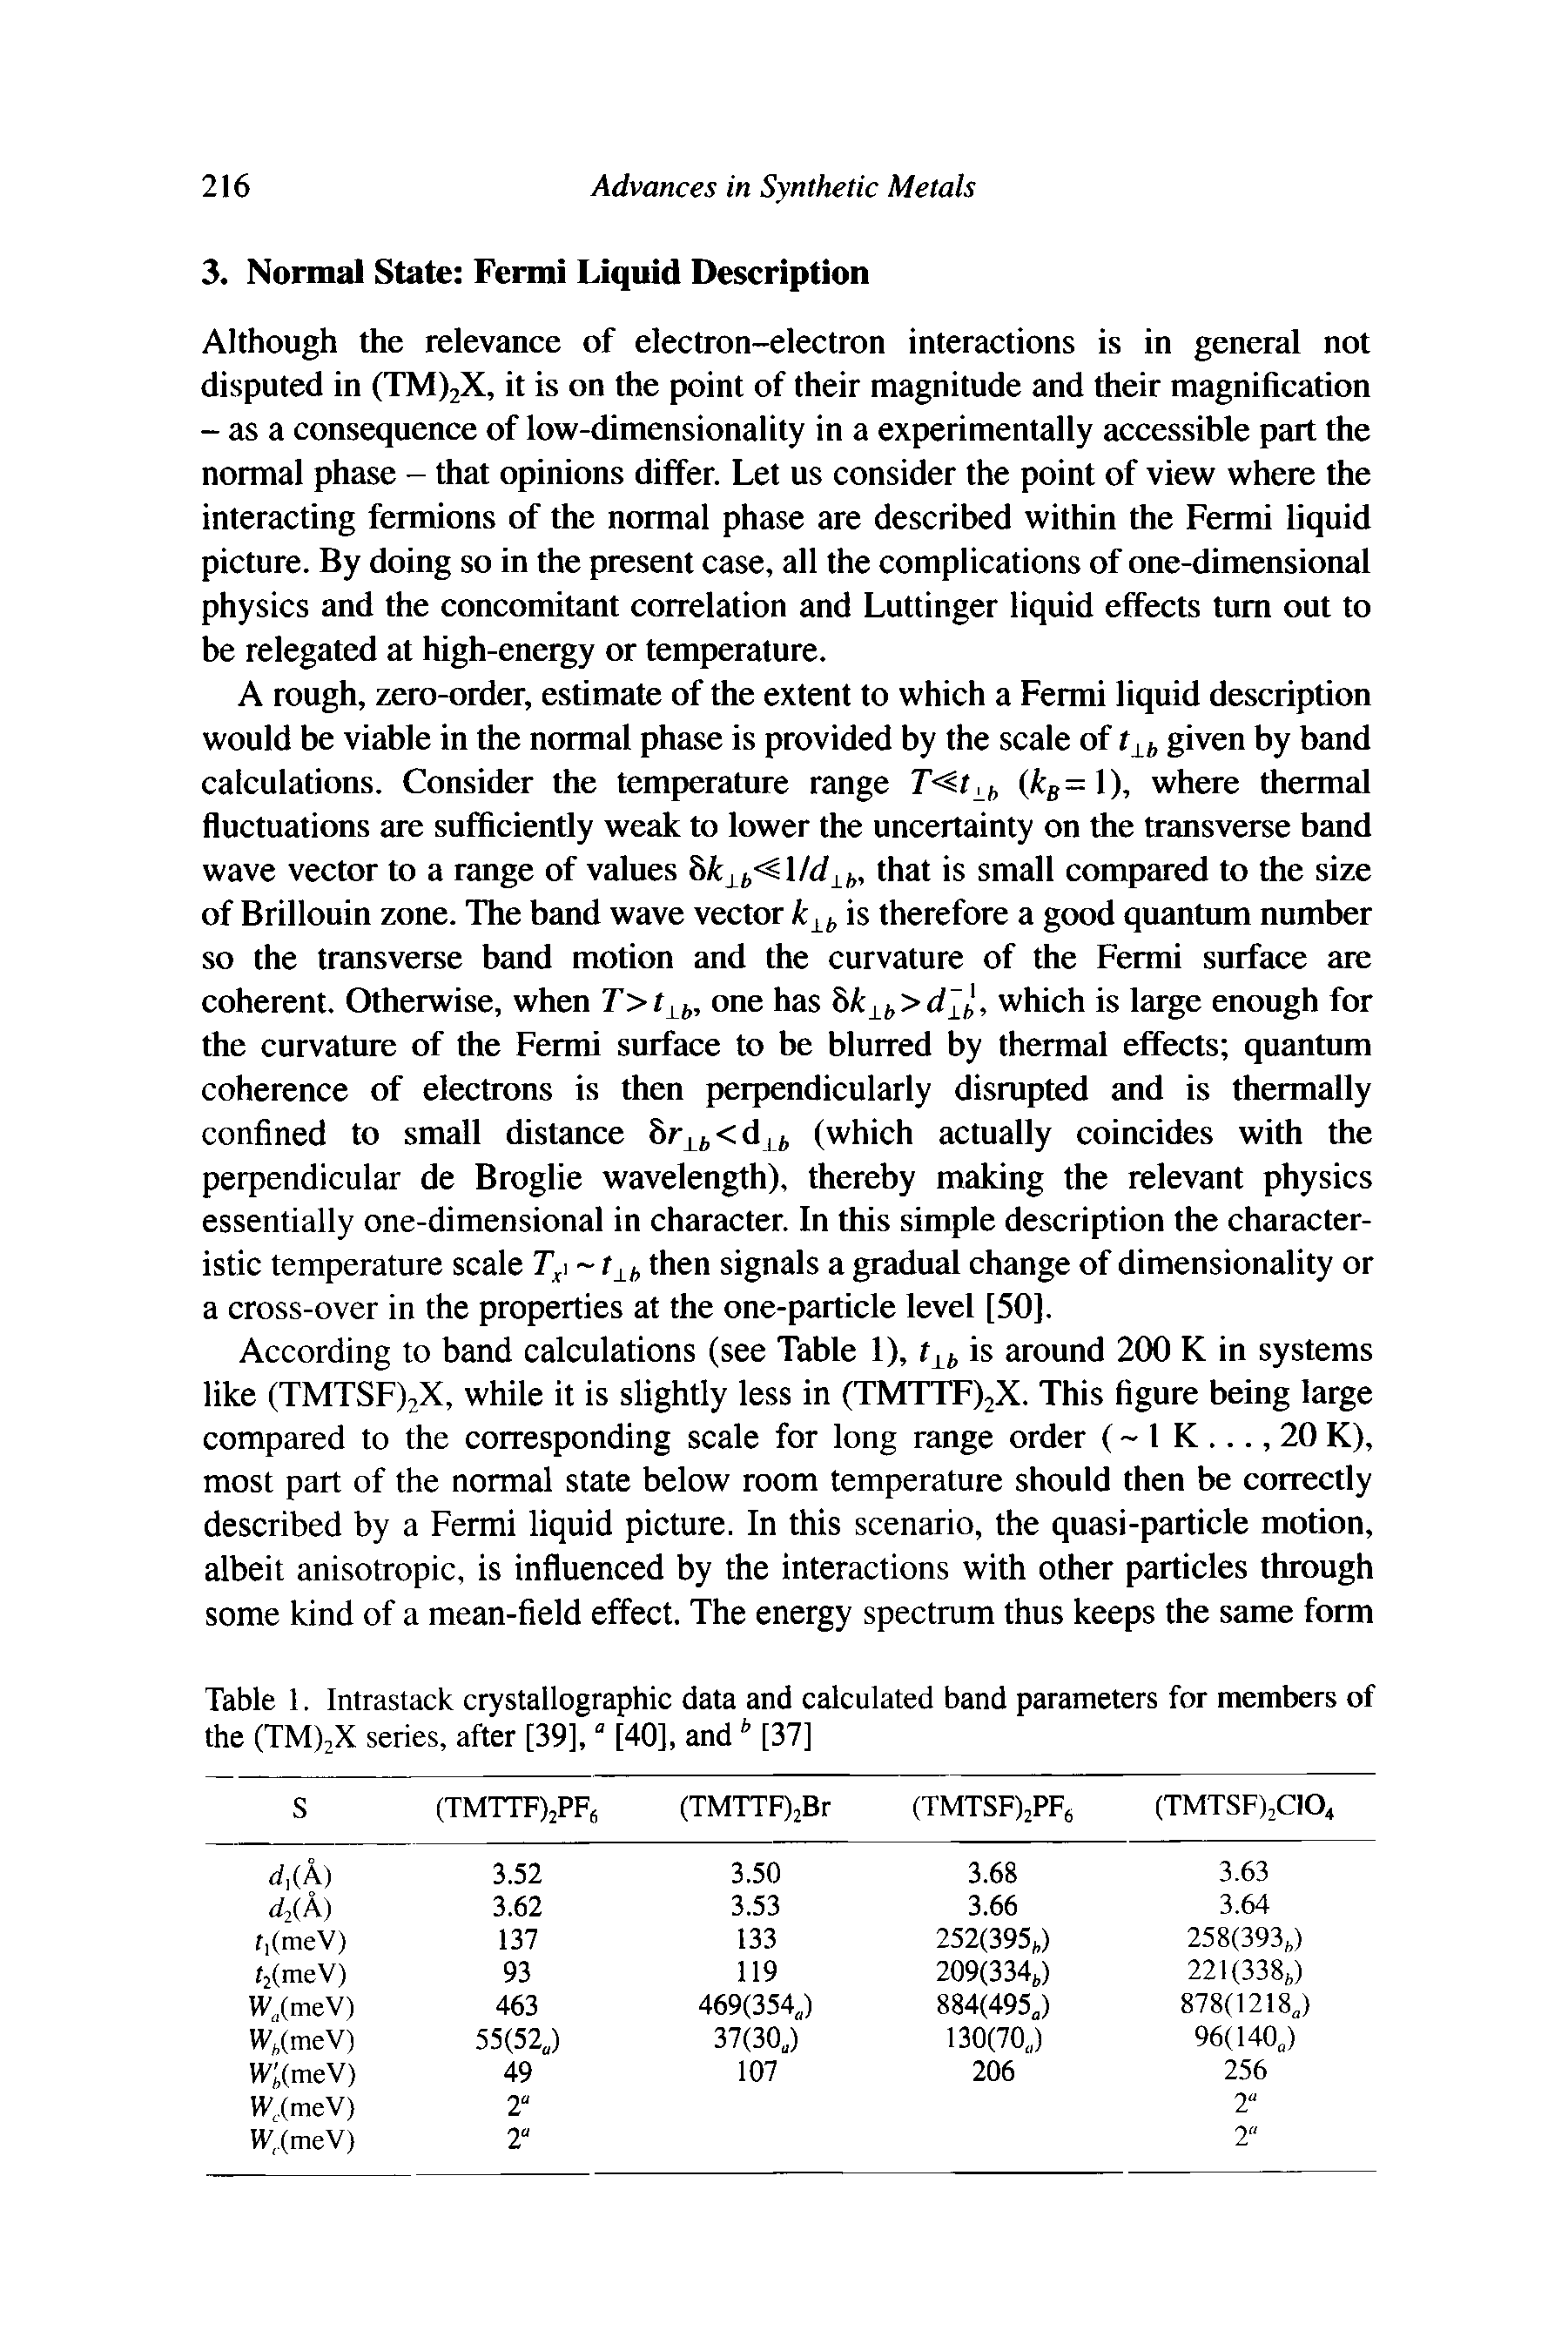 Table 1. Intrastack crystallographic data and calculated band parameters for members of the (TMfjX series, after [39], ° [40], and [37]...